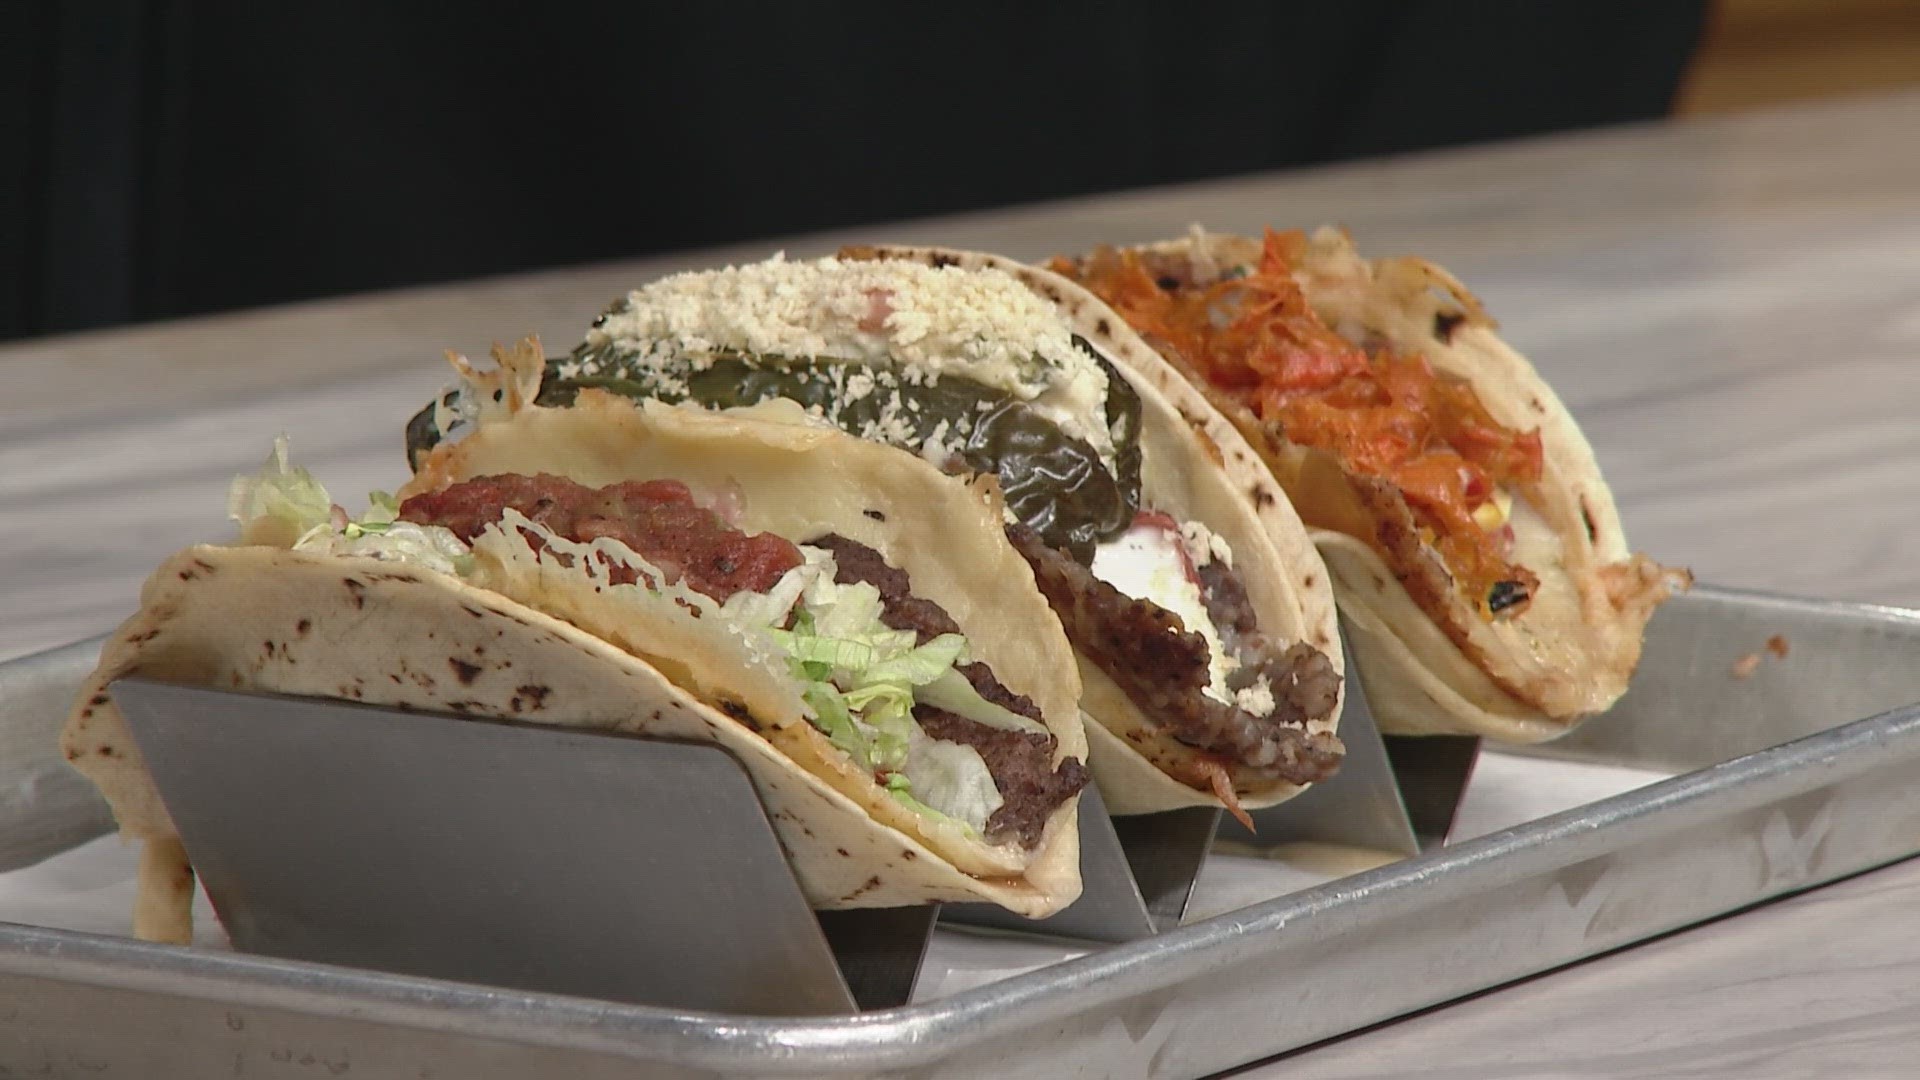 Cleveland Taco Week begins Monday! Damon Heeter from Agave & Rye joins 3News' Kierra Cotton to show us the specials they've been working on to mark the occasion.